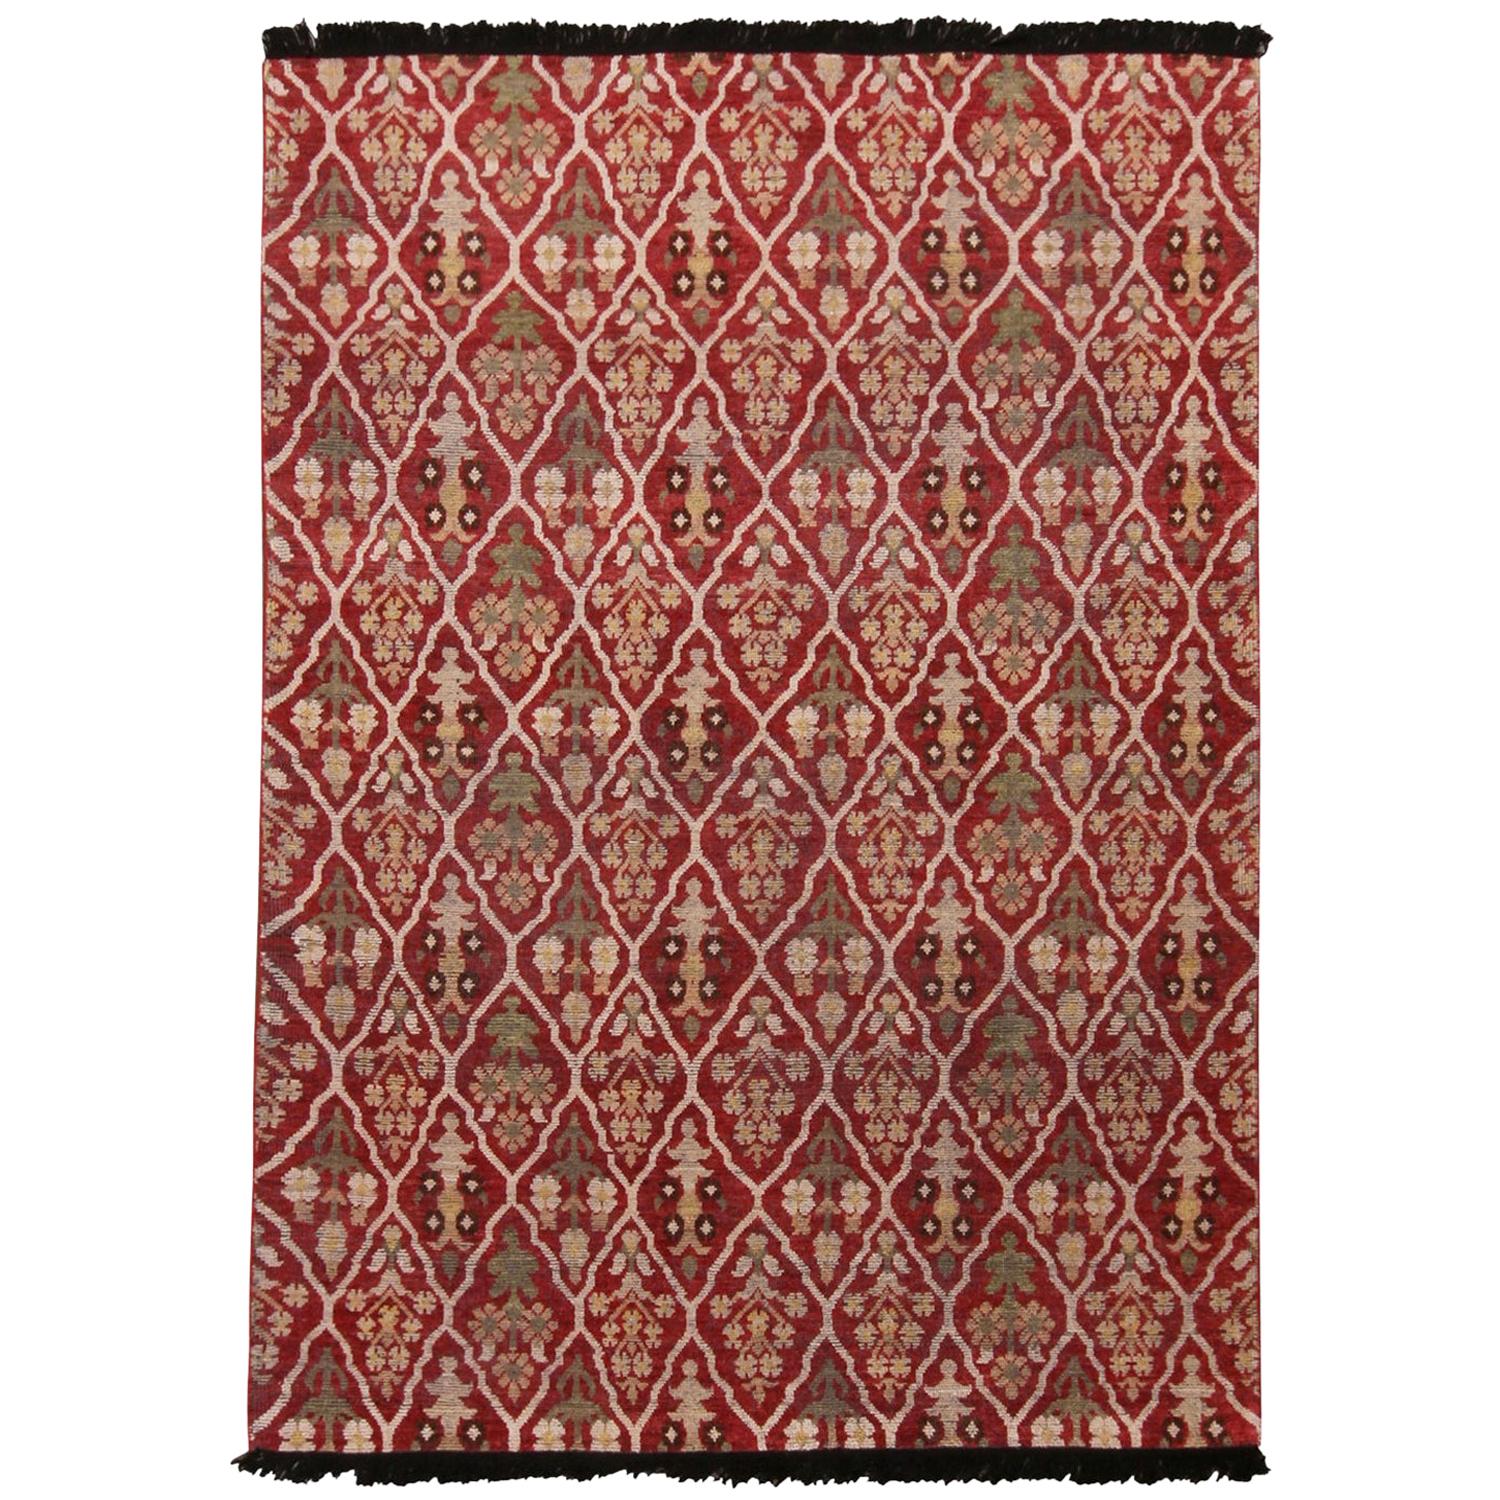 Rug & Kilim's Burano Beige and Burgundy Red Wool Rug with Green Accents